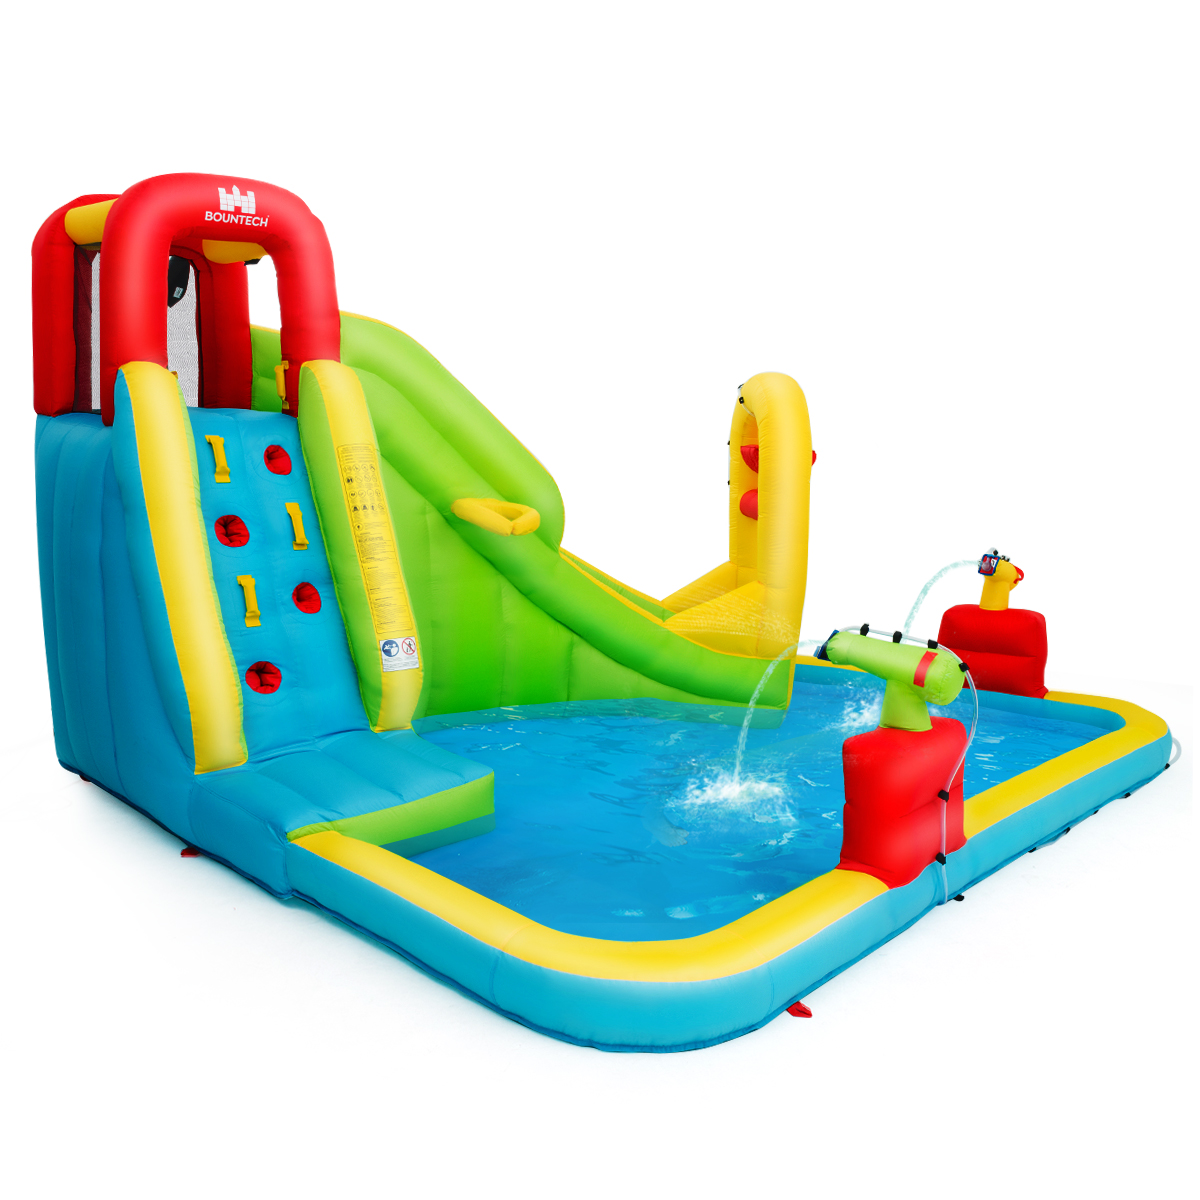 Inflatable Waterslide with Blower and Carrying Bag, for Outdoor Summer Fun